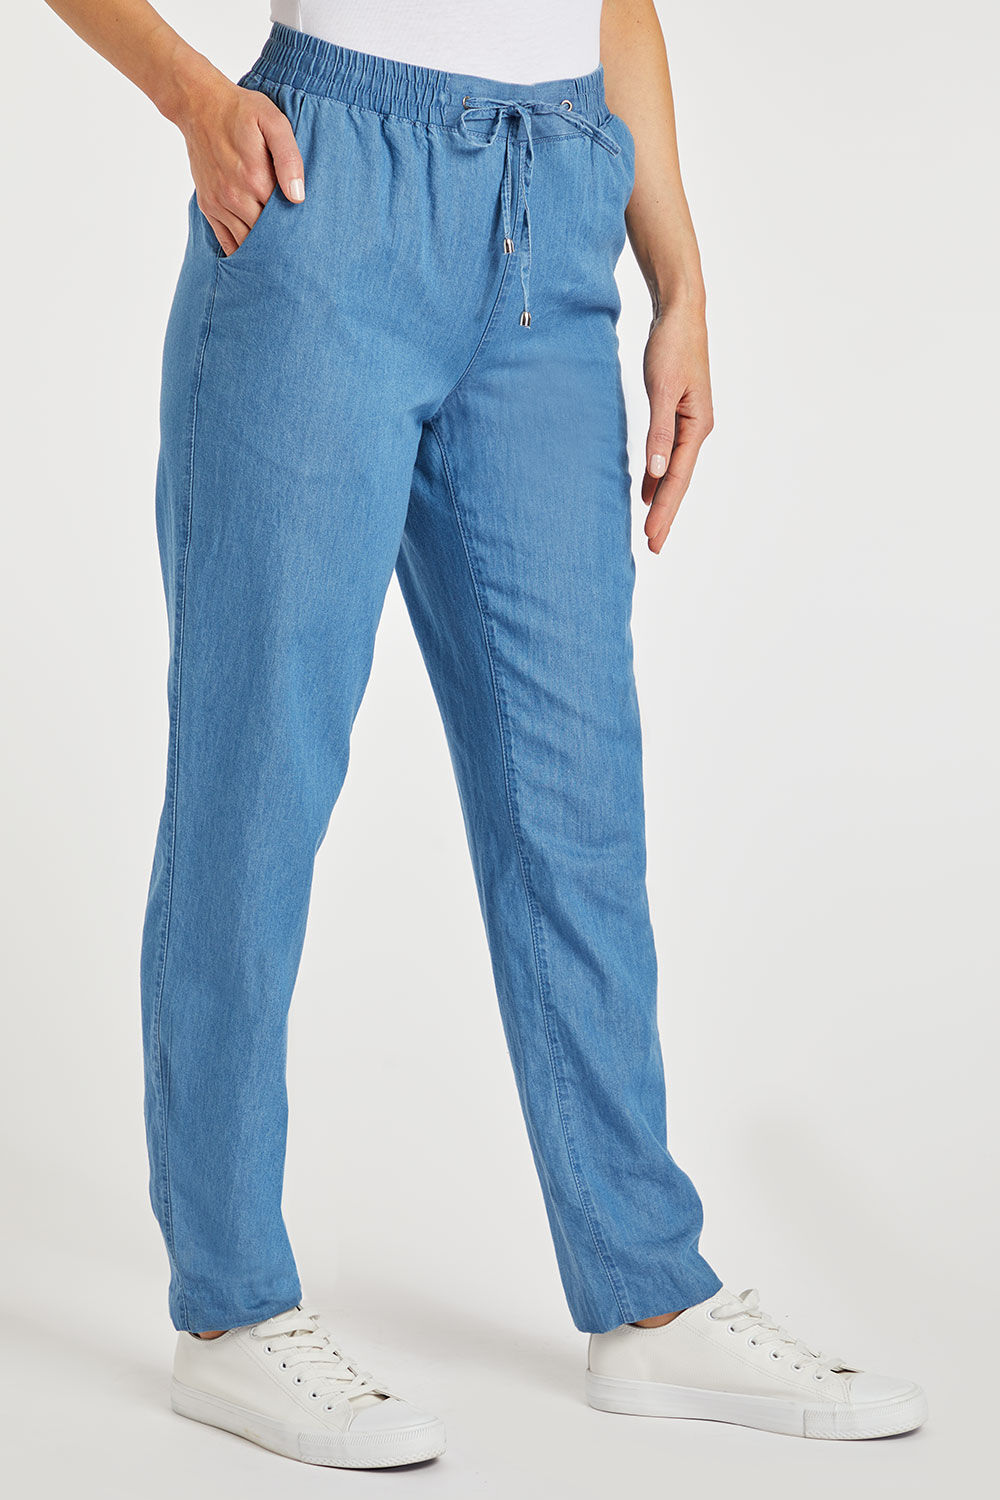 Buy Blue Cotton Linen Pant For Women by Chambray & Co. Online at Aza  Fashions.